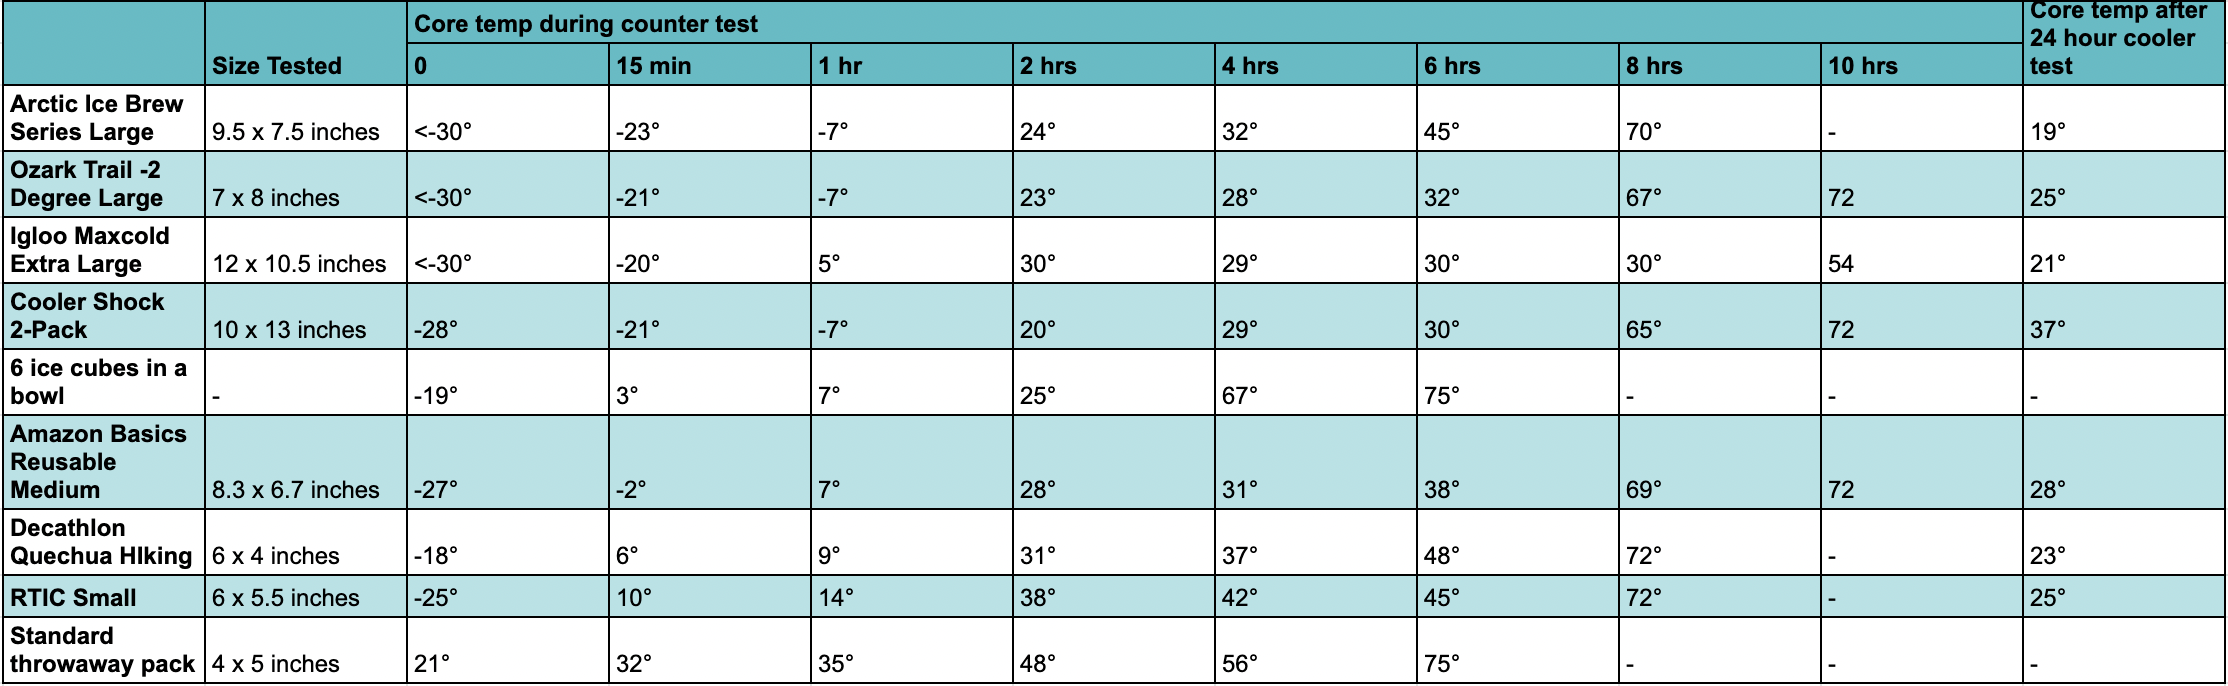 This table shows the results of testing the best ice packs for coolers.